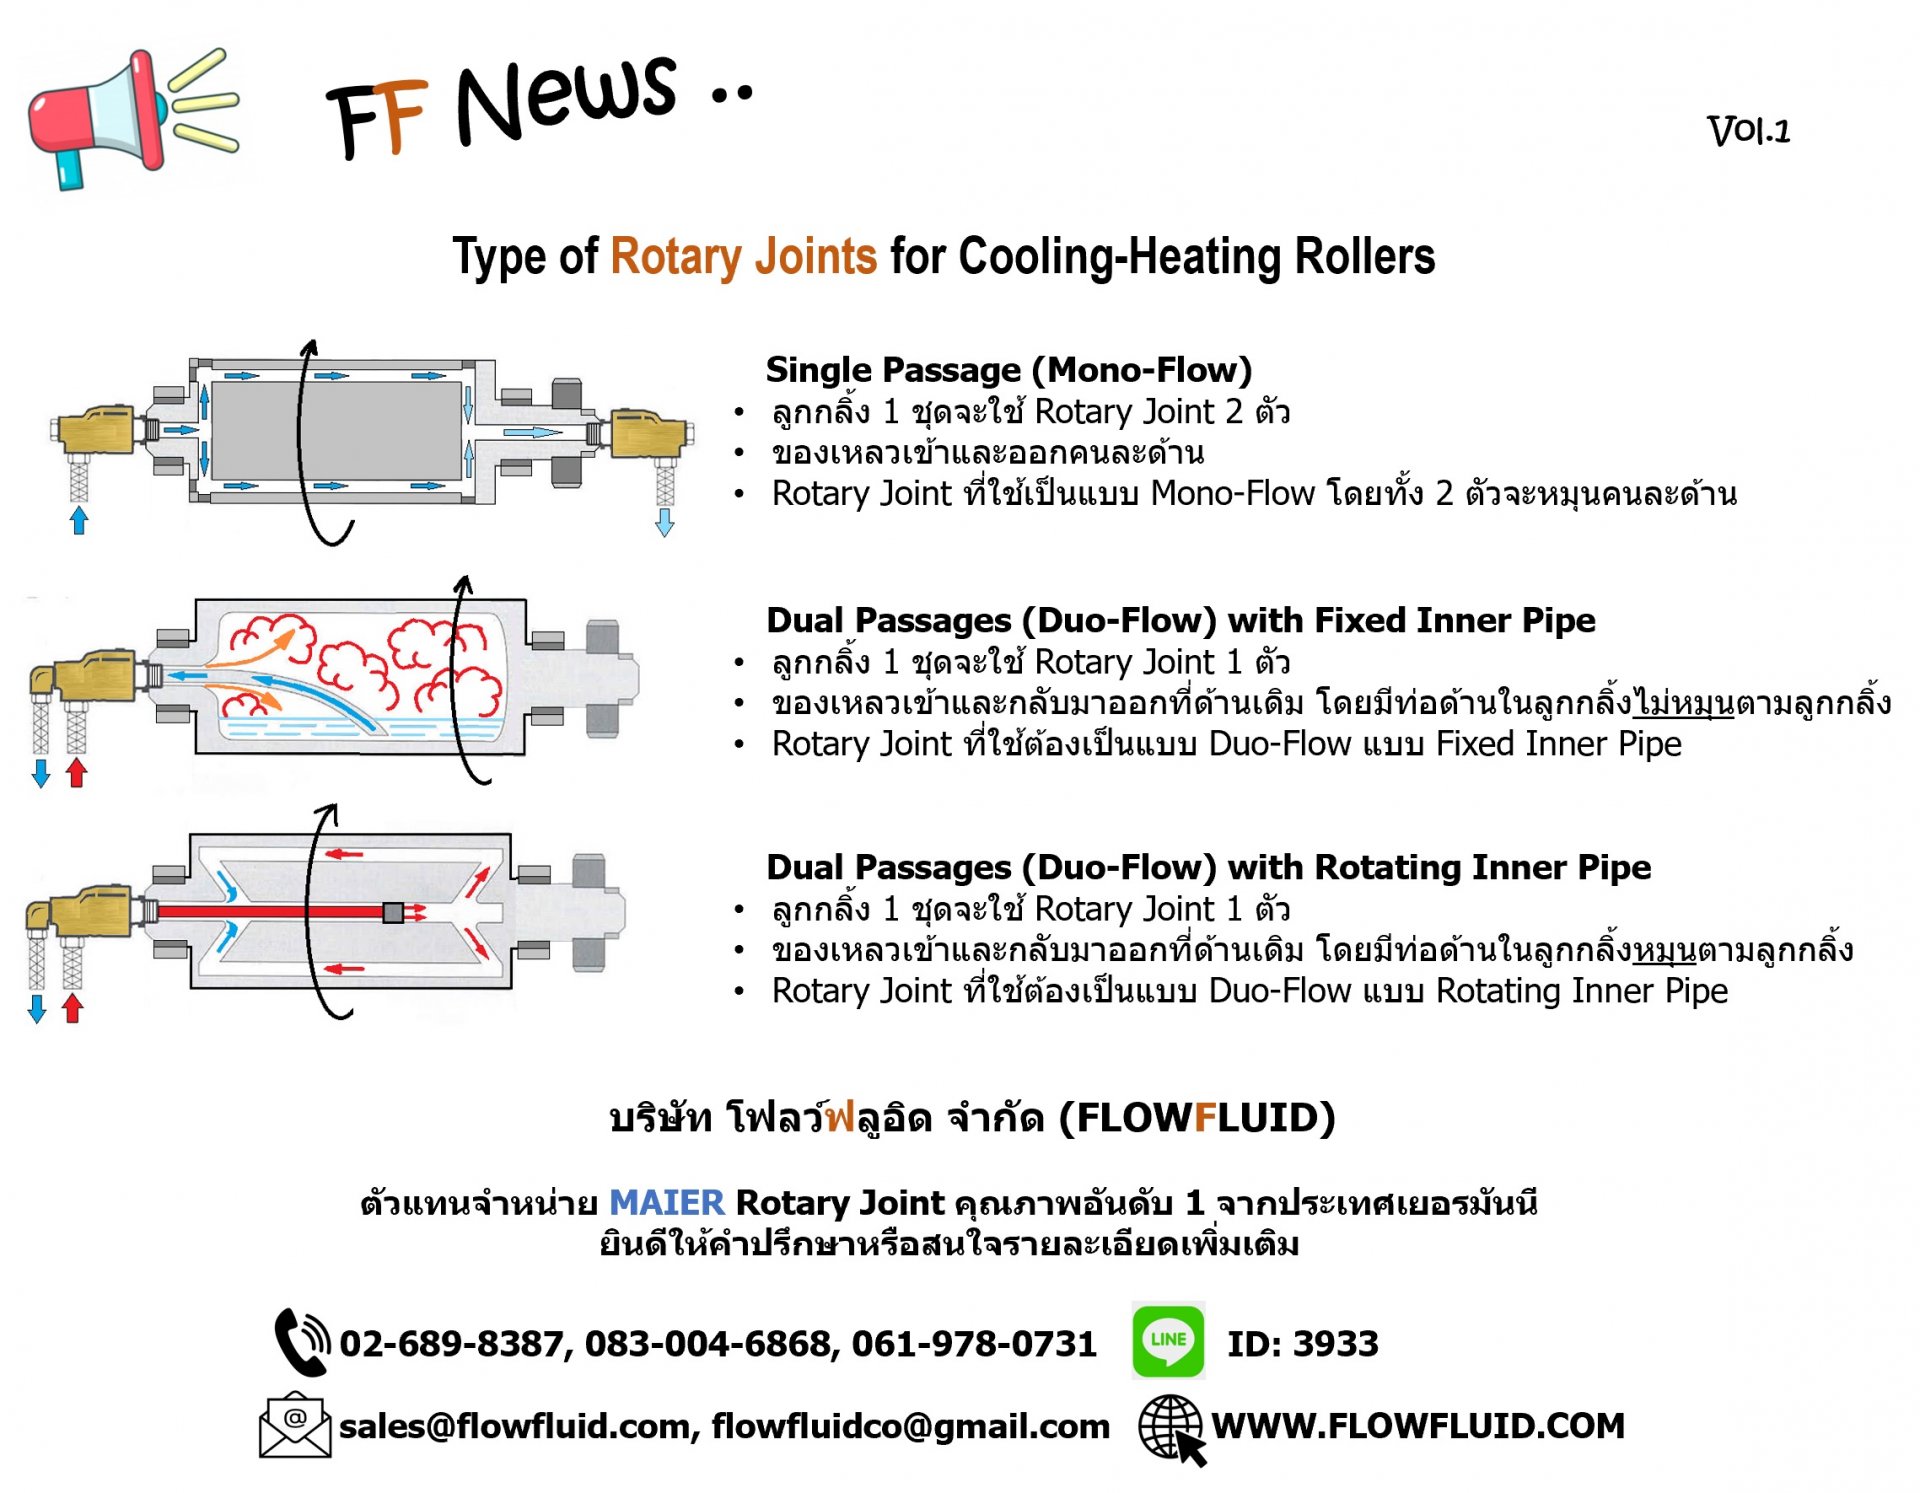 Type of Rotary Joints for Cooling-Heating Rollers